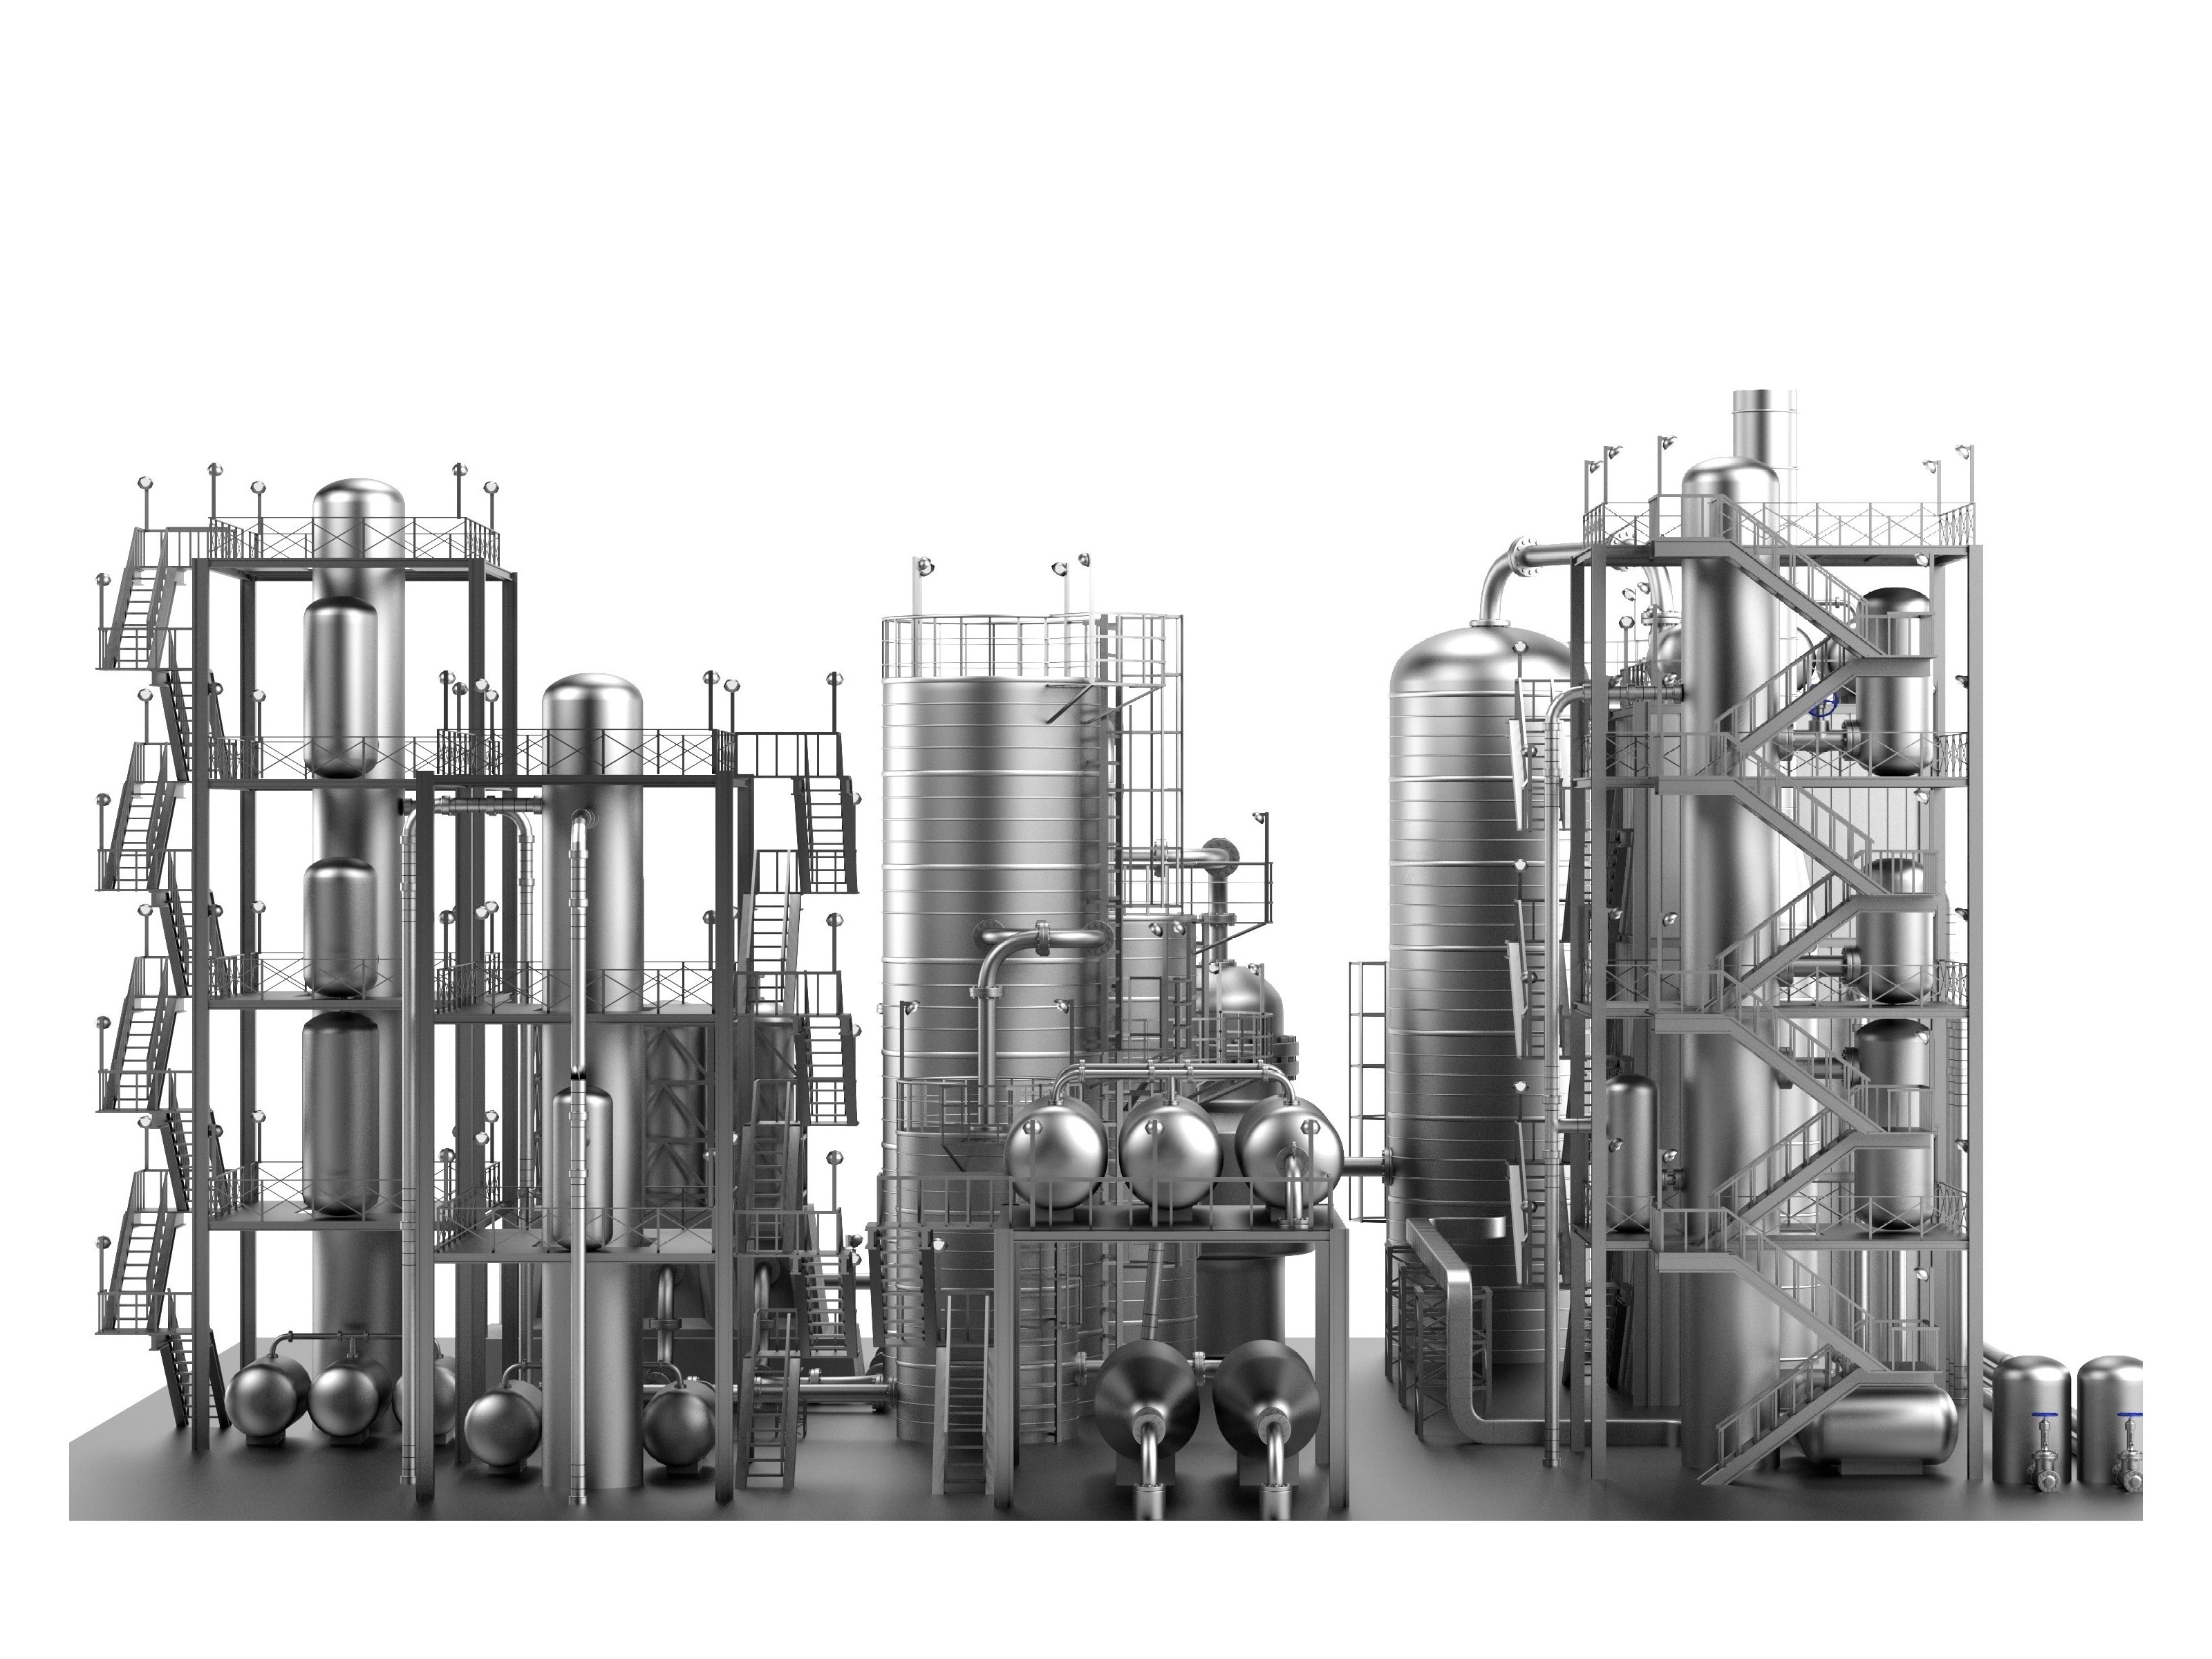 3D Rendering of an Oil Refinery